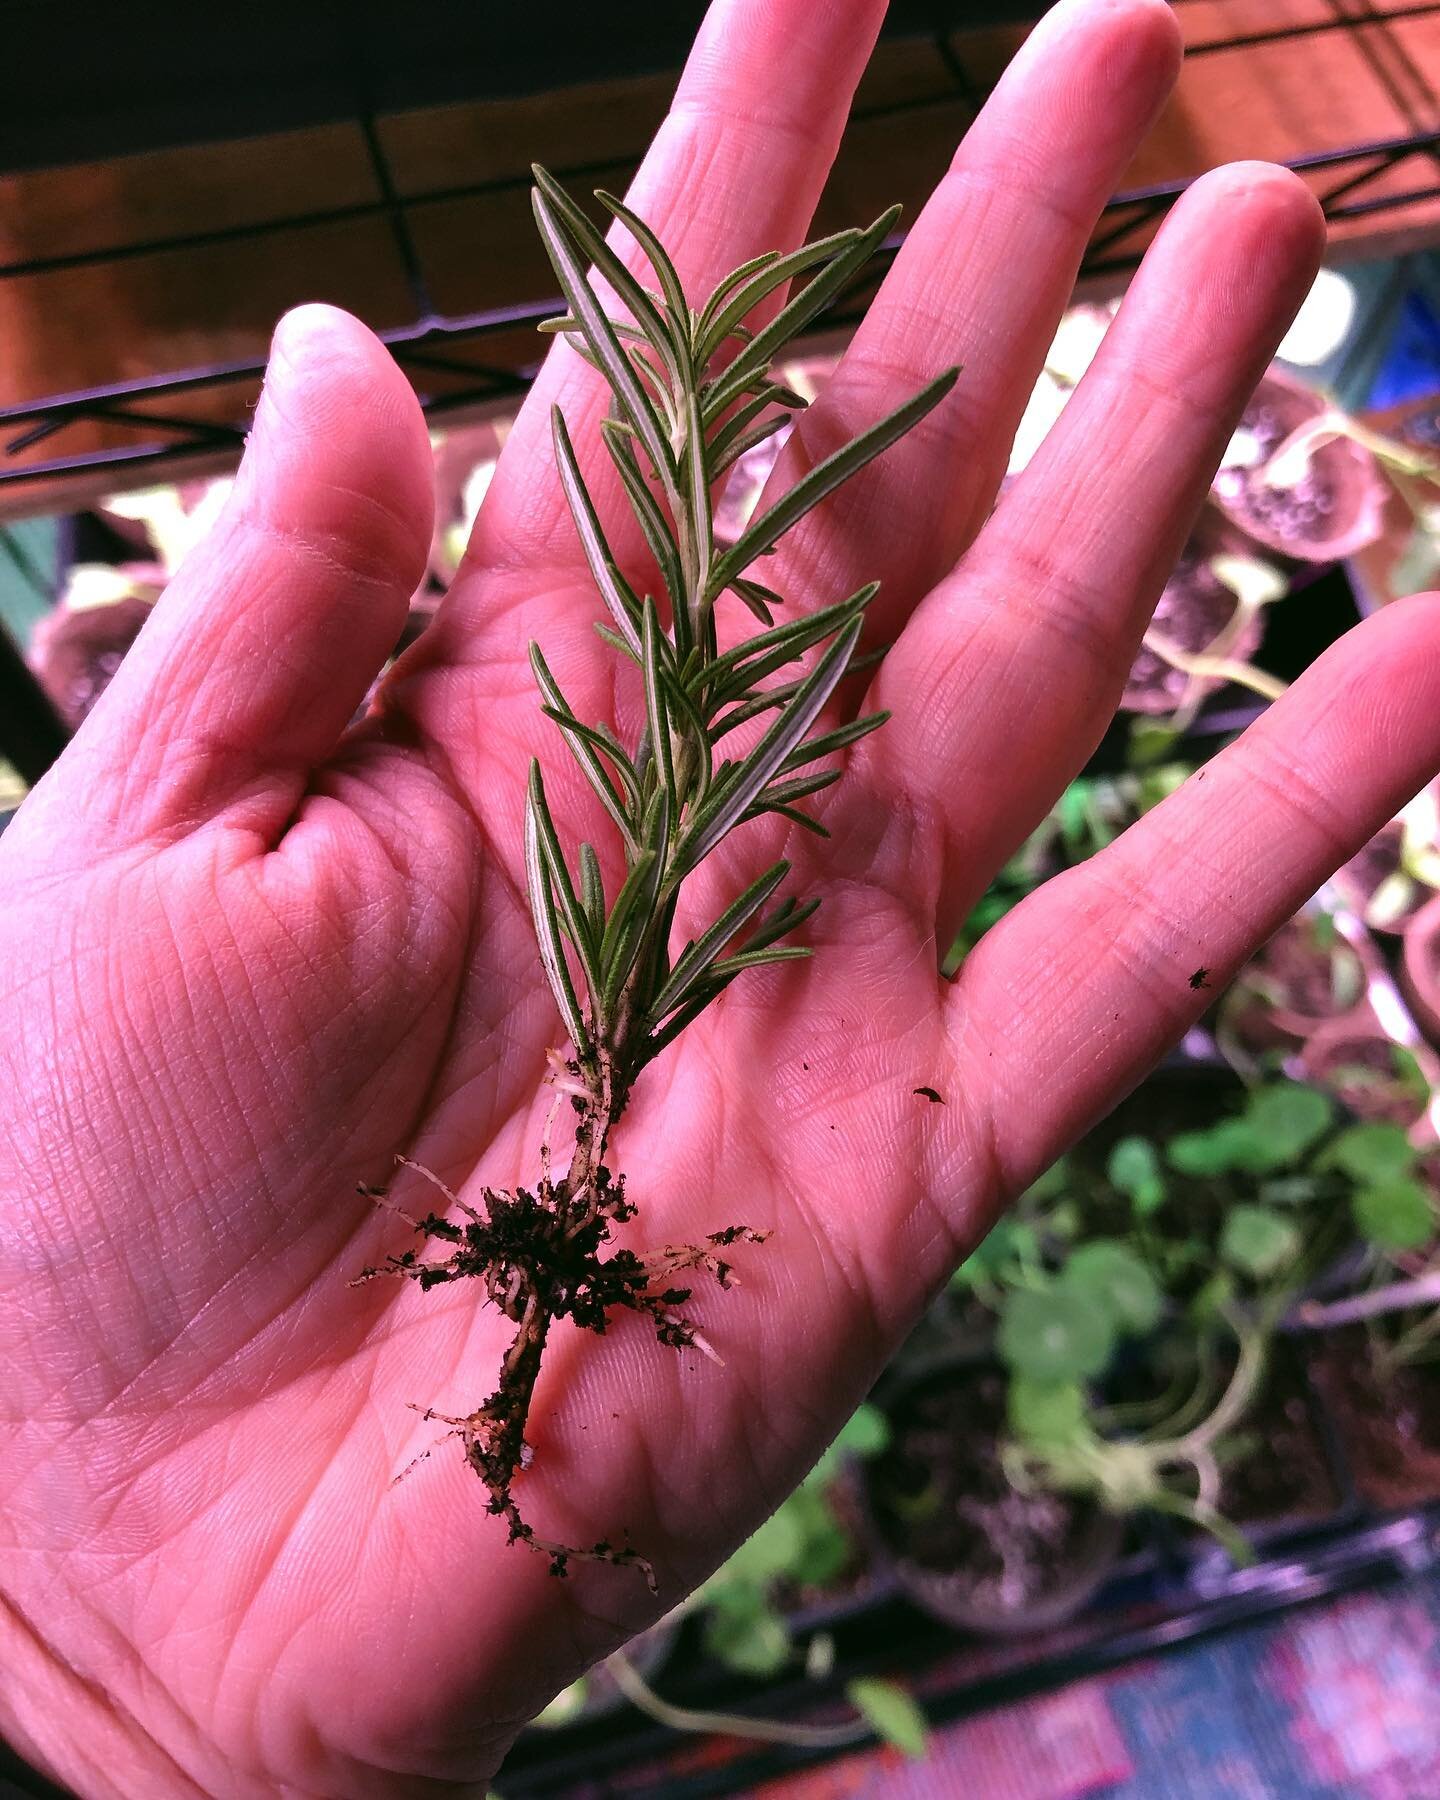 Totes #rooted some of the #rosemary that I had leftover from a @hellofresh meal! 😎

Do people still use &ldquo;totes?&rdquo; I&rsquo;d hate to lose that along with my skinnies and side part. 😂